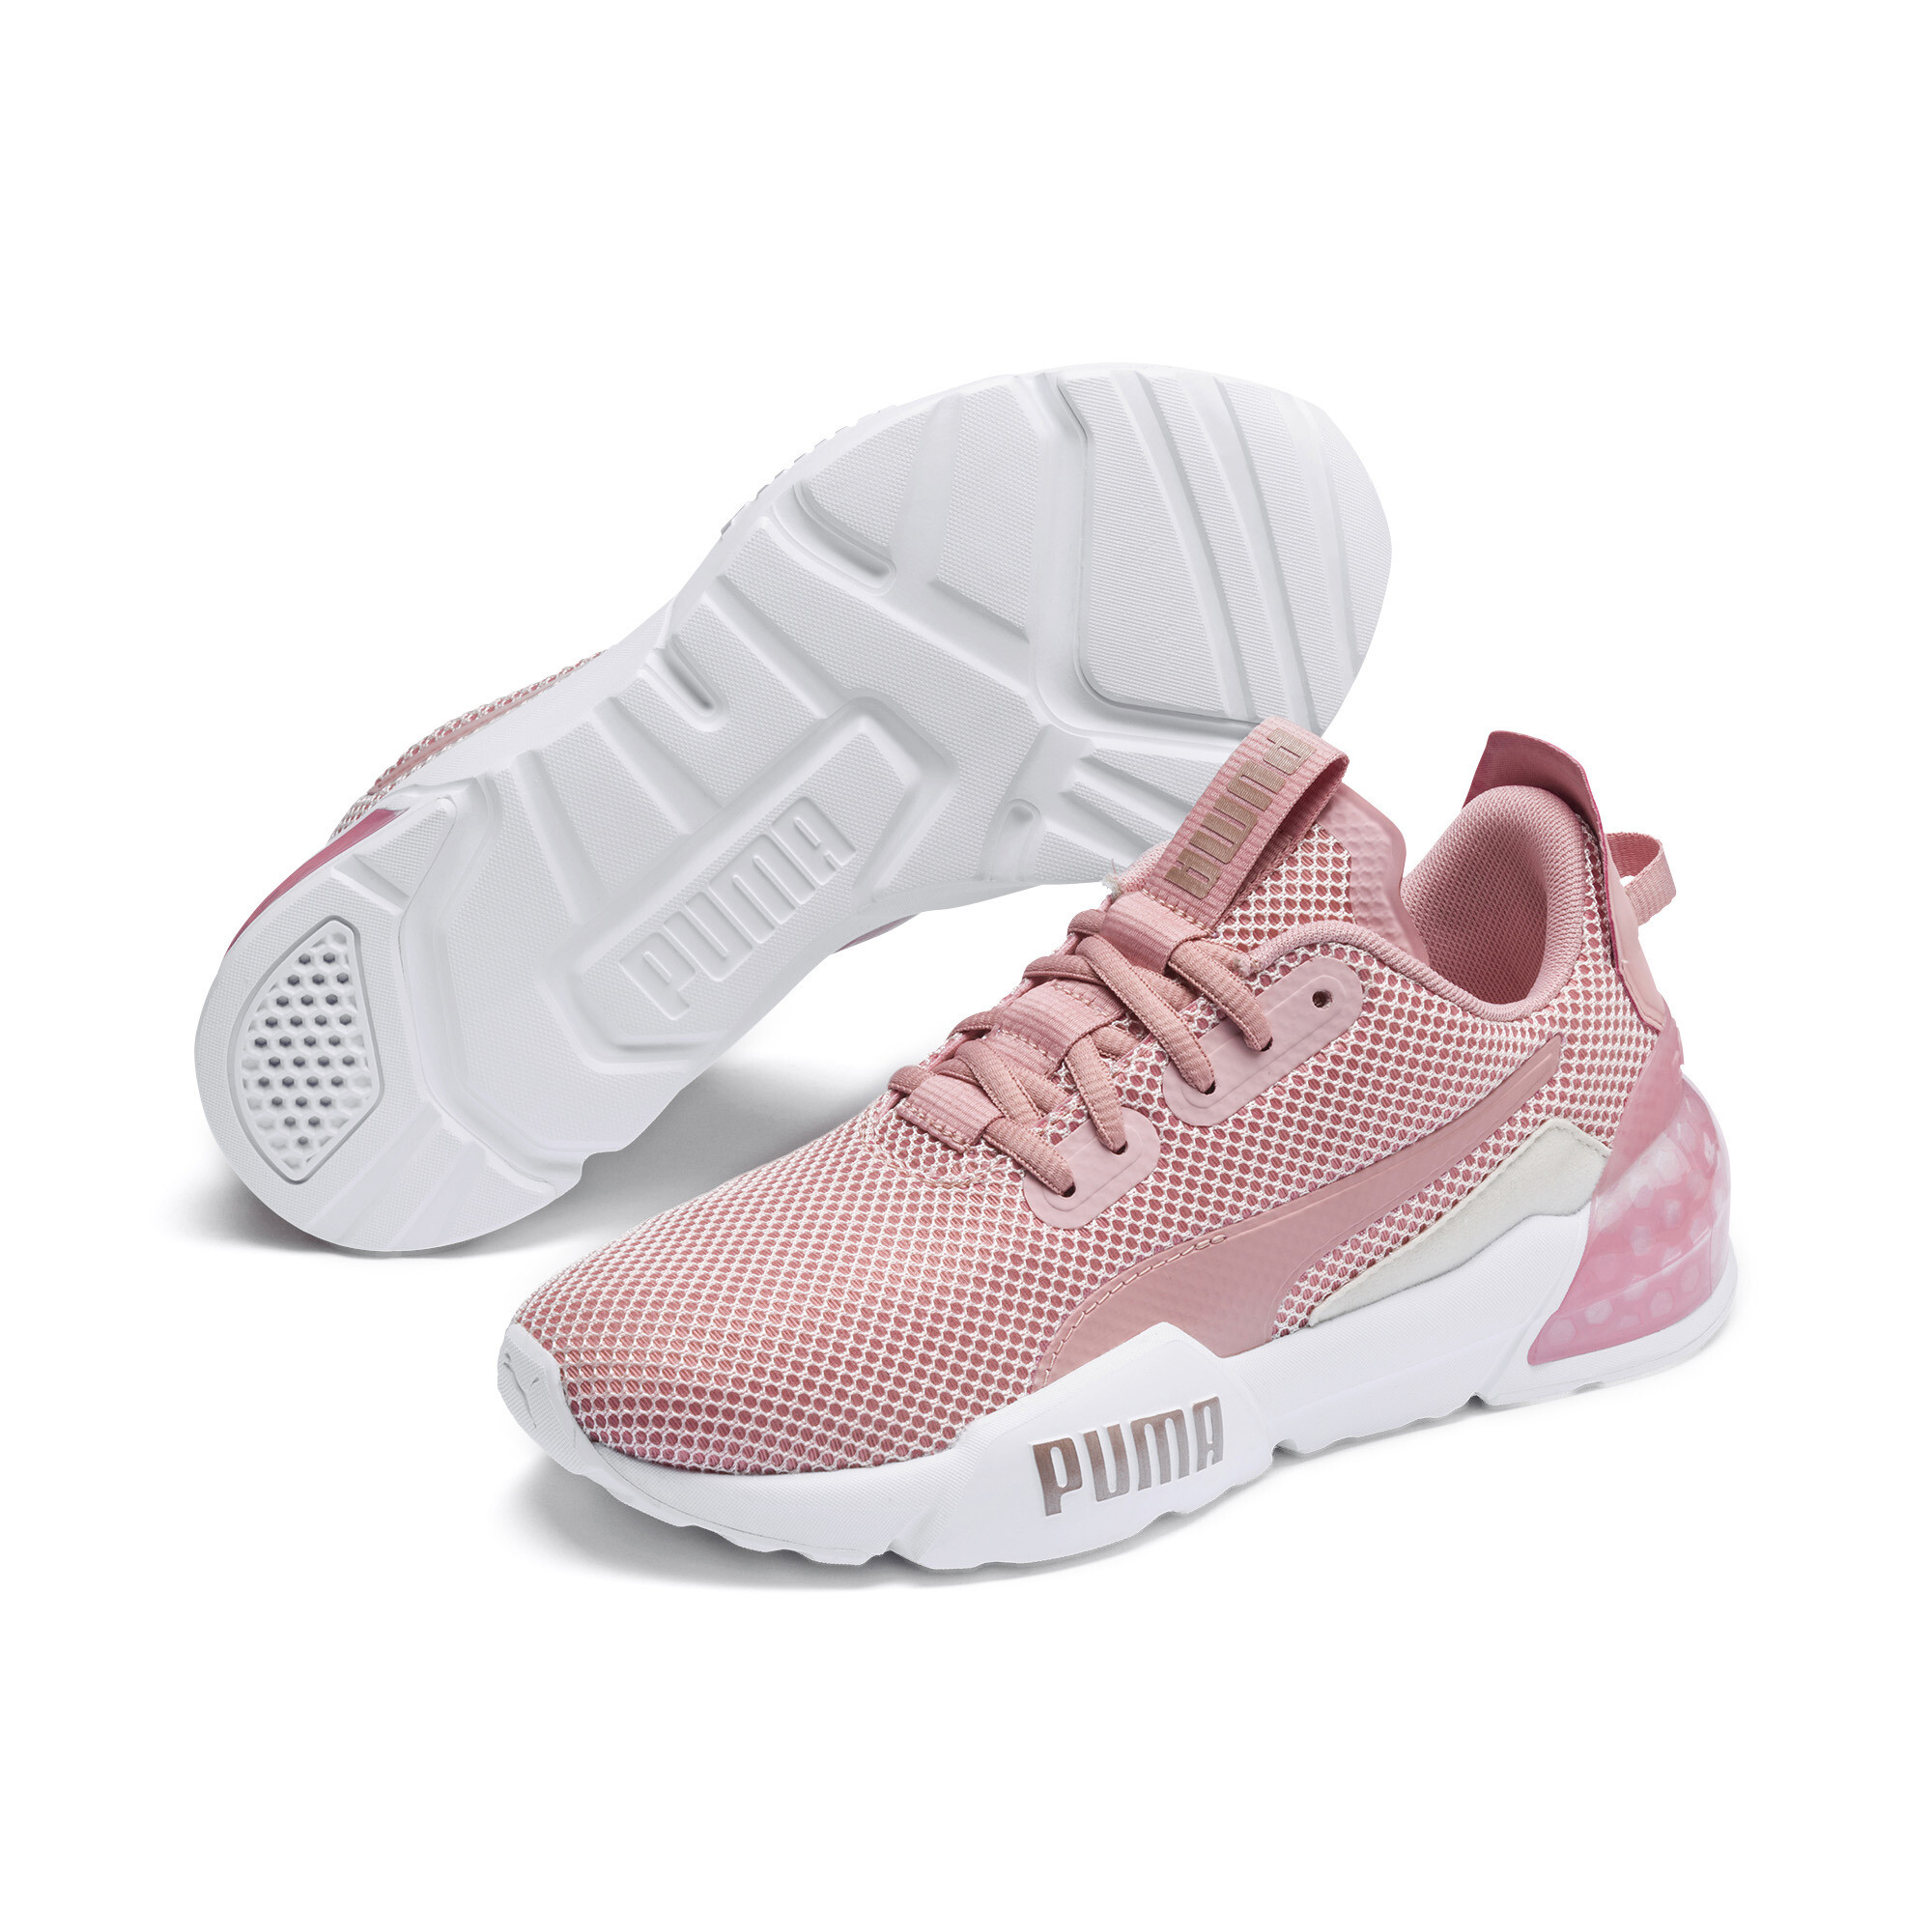 PUMA Women's CELL Phase Training Shoes 